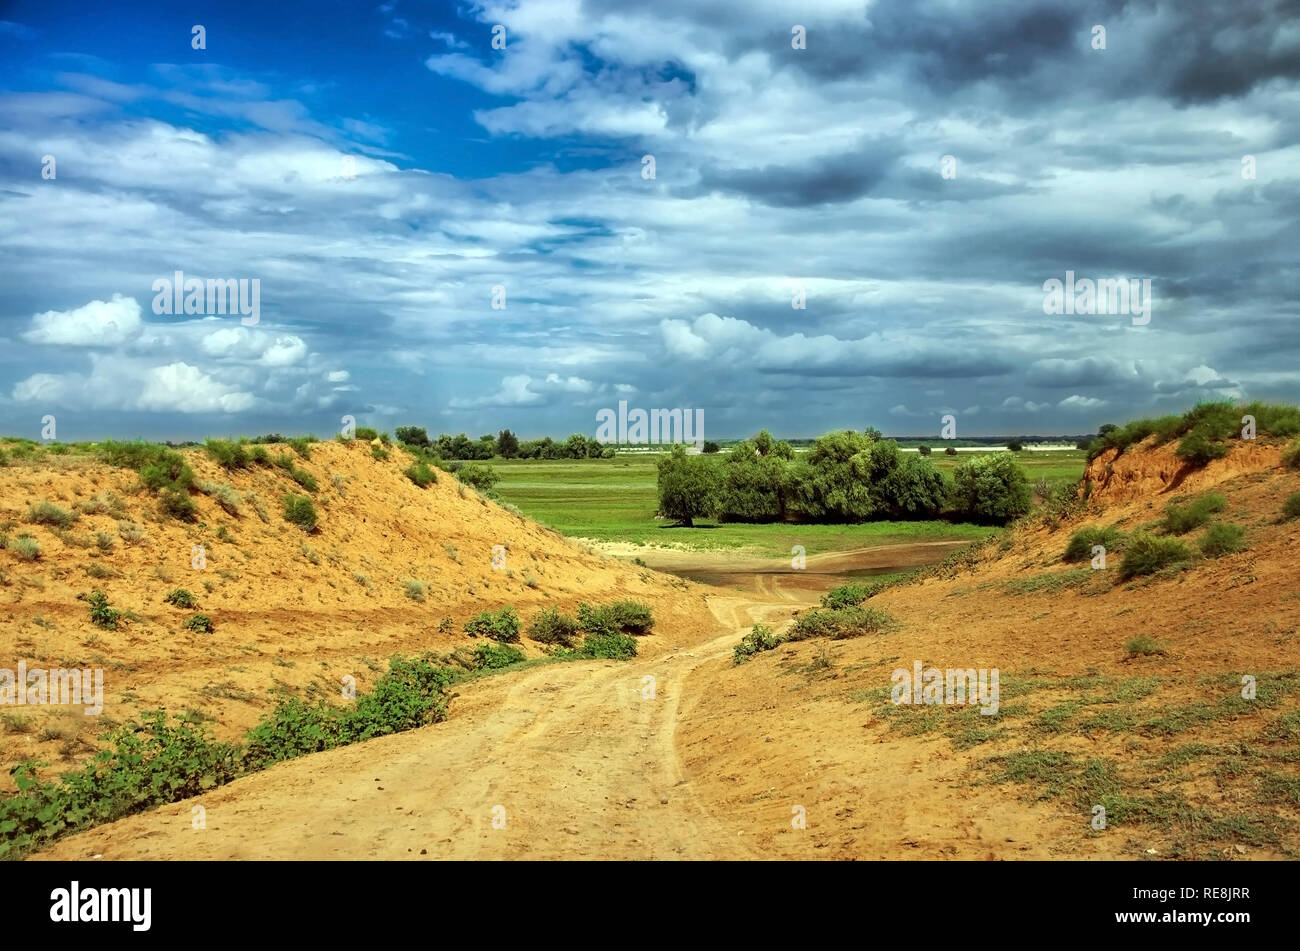 landscape with hills clay soil Stock Photo